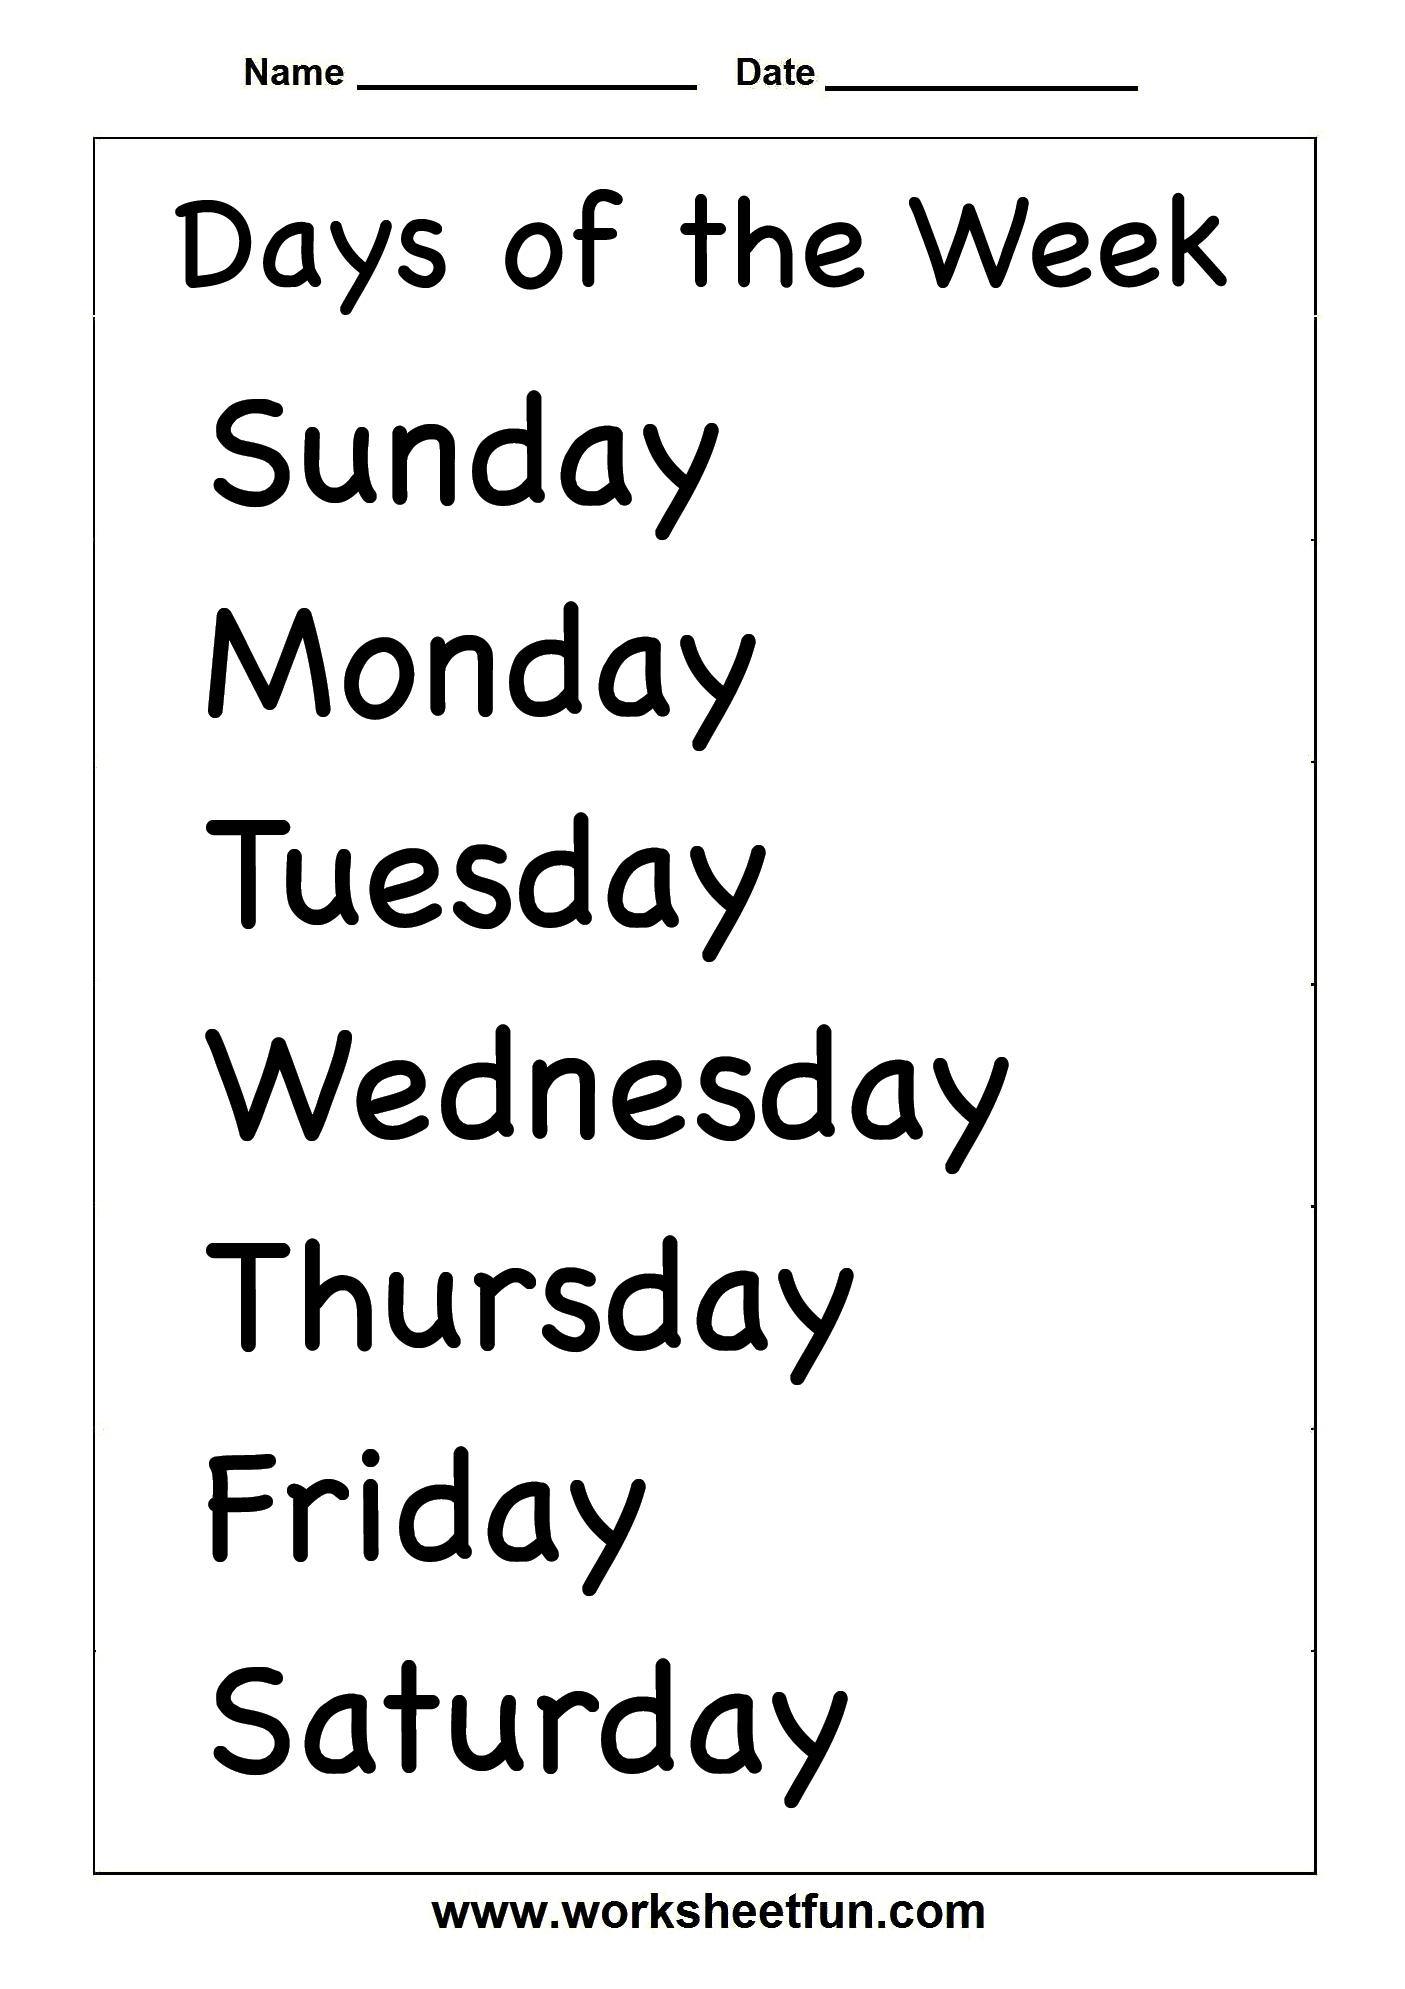 Days Of The Week – Two Worksheets / Free Printable Worksheets - Free Printable Worksheets